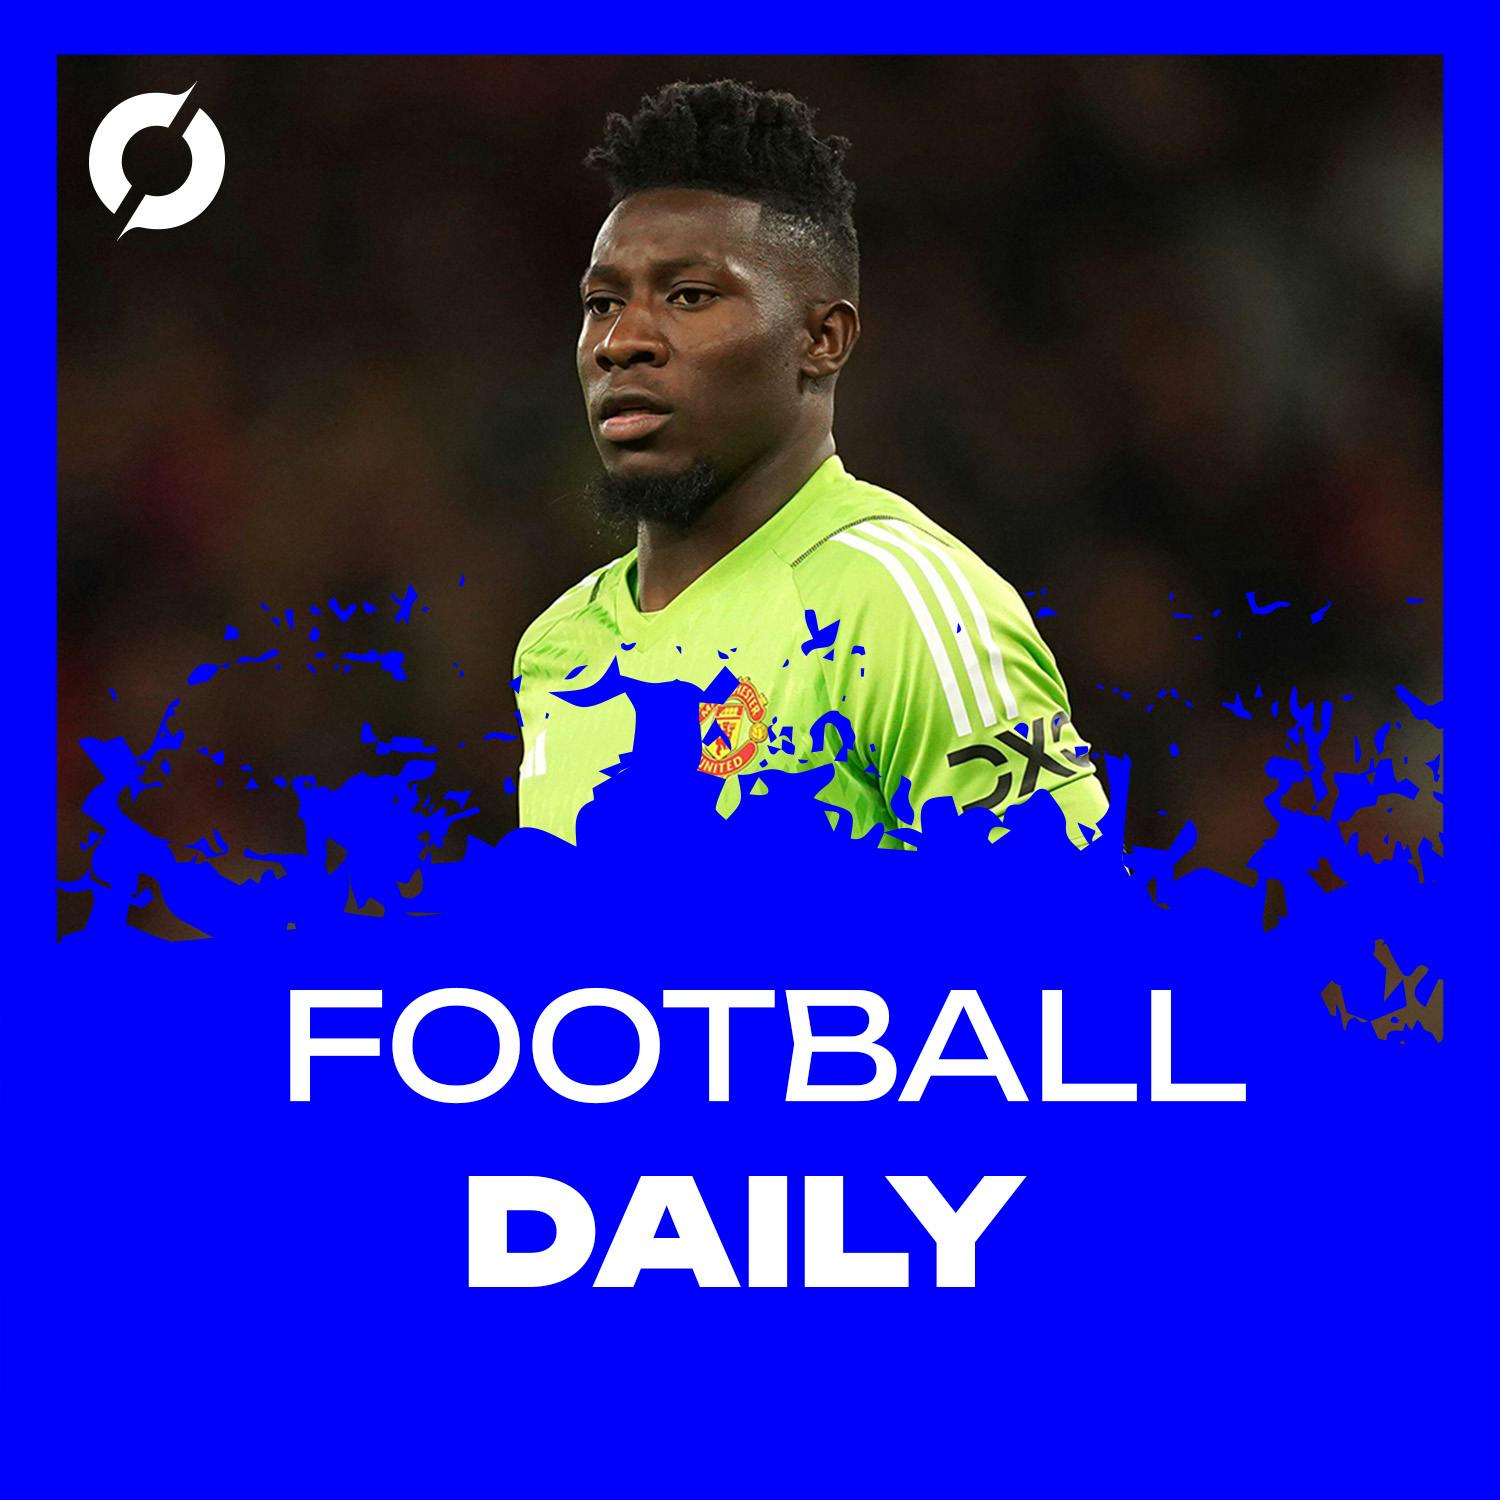 Football Daily: United and Arsenal in Champions League action, Mudryk off the mark for Chelsea, Liverpool receive VAR audio